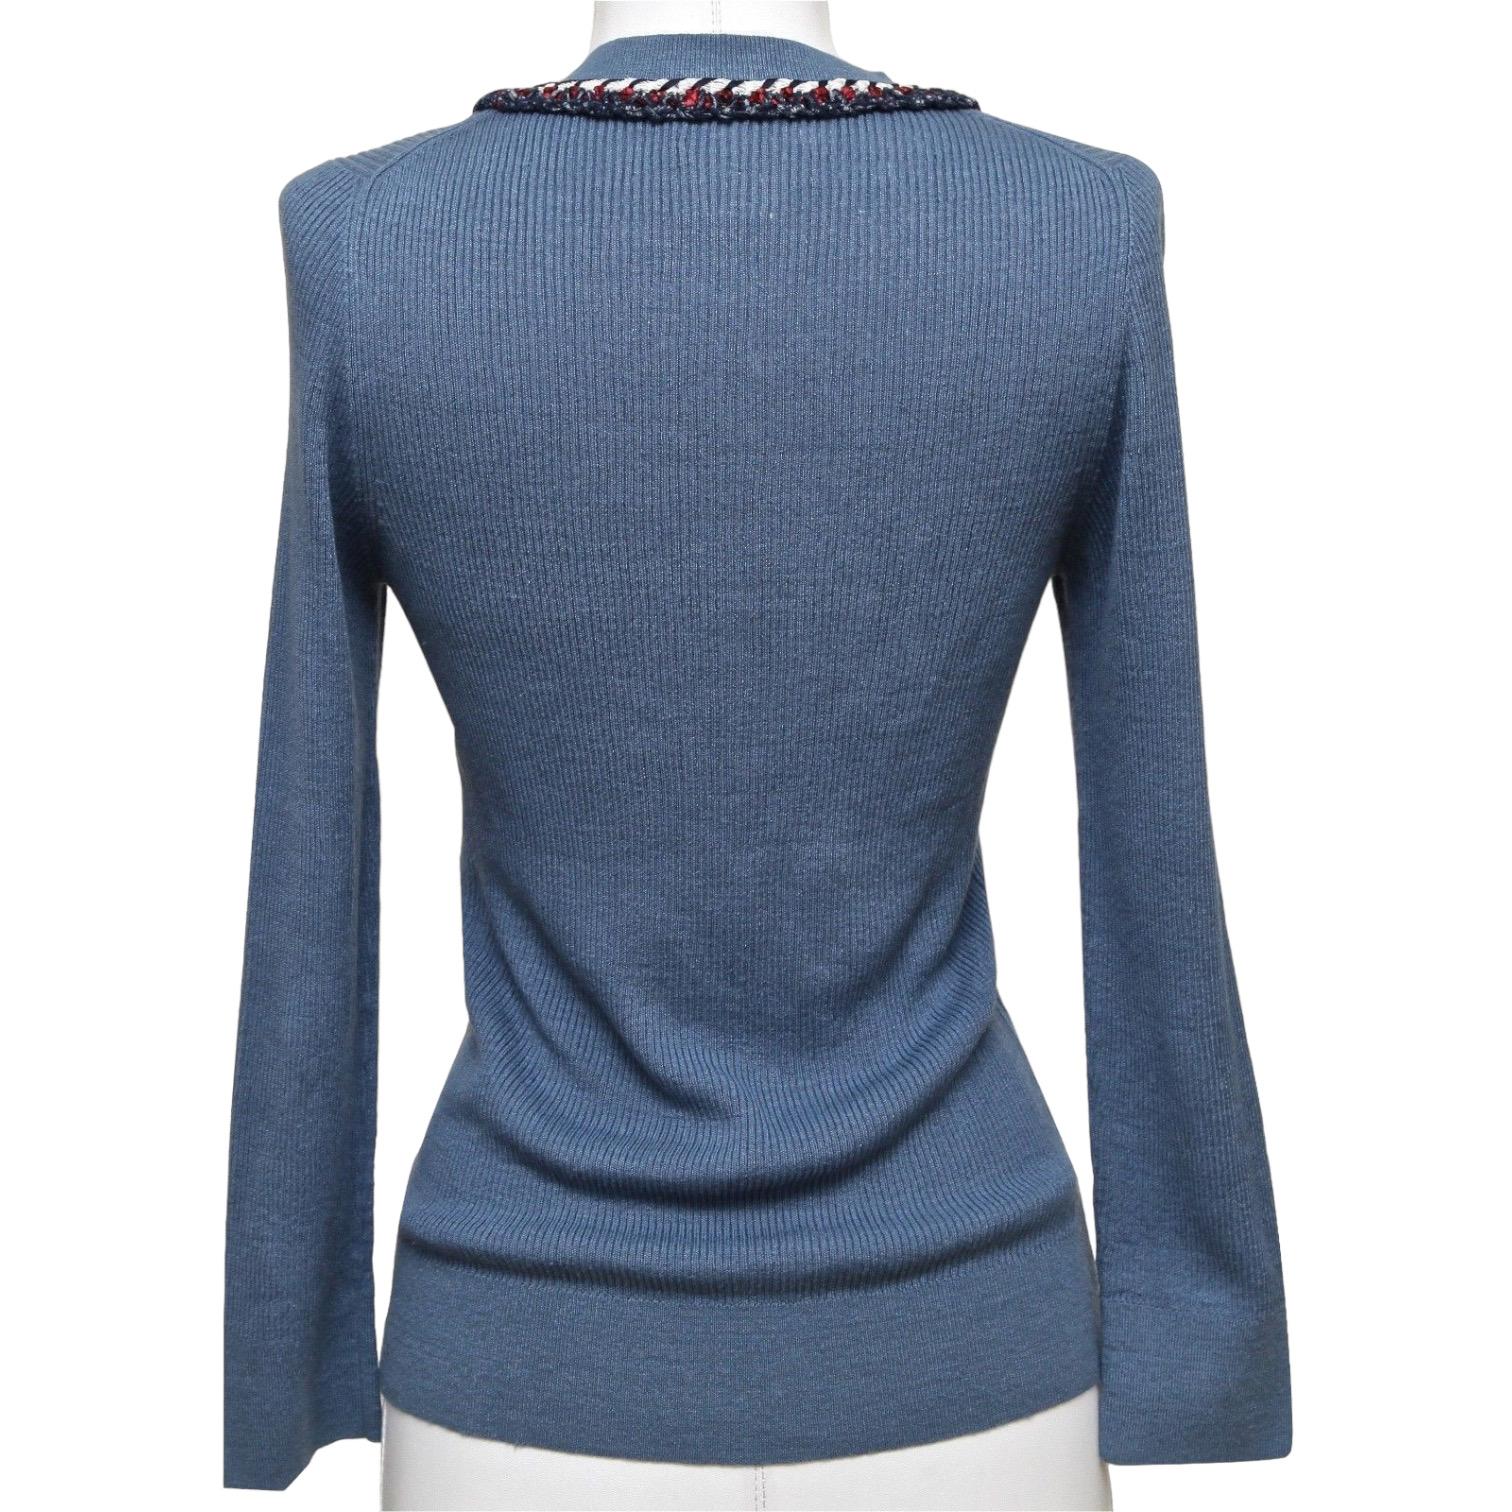 CHANEL Knit Sweater Top Long Sleeve Navy Red White Blue Silver HW 40 13C 2013 For Sale 1